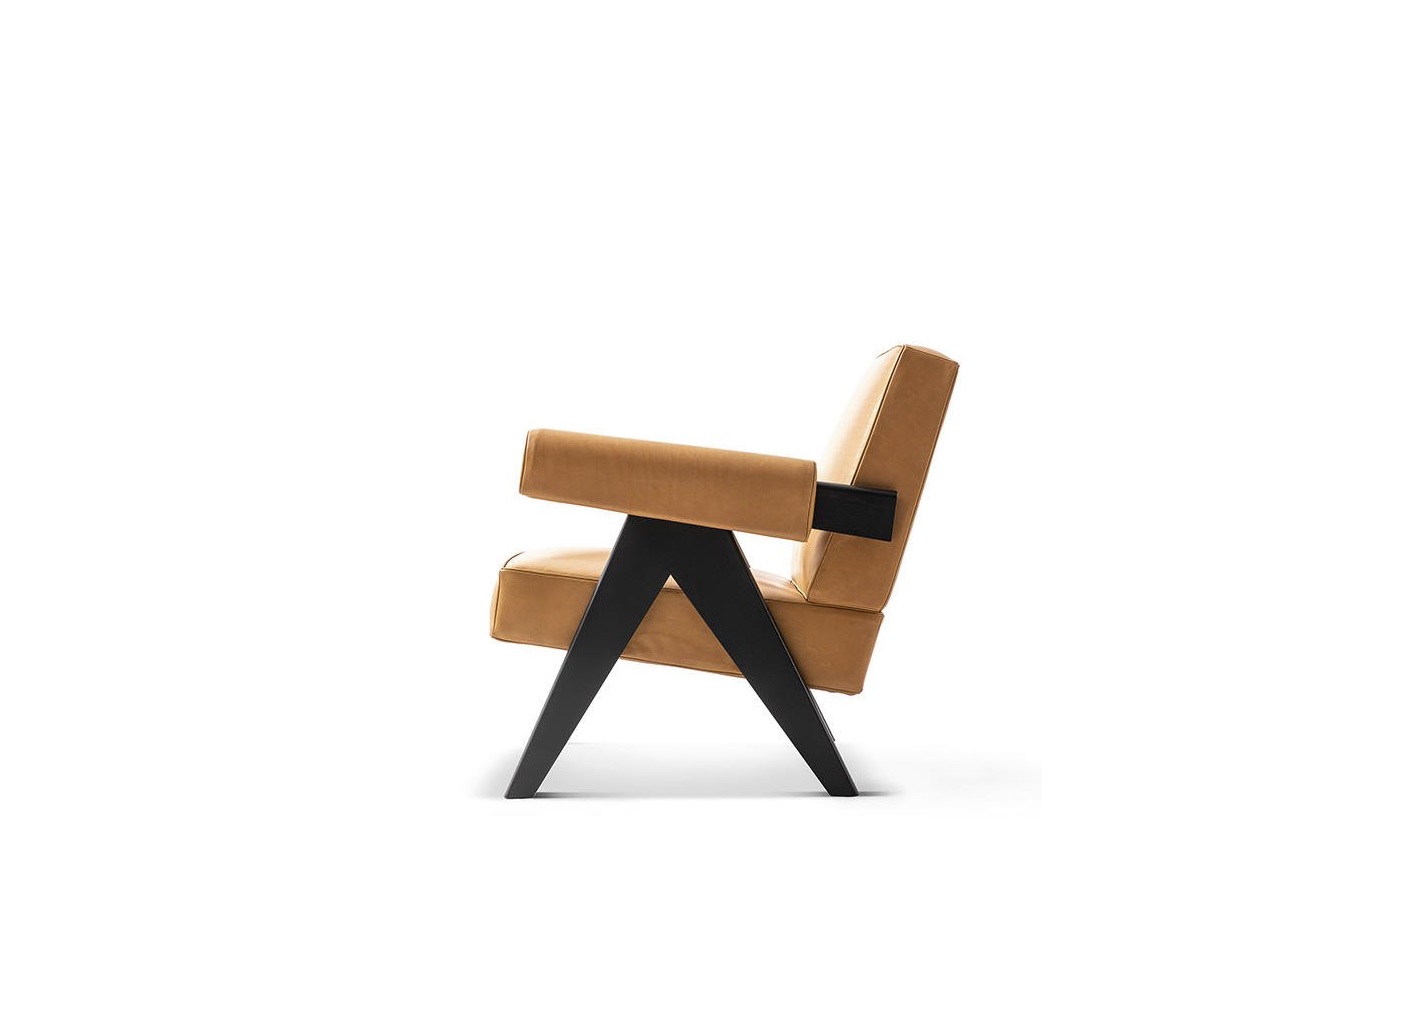 7_cassina_capitol_complex_armchair_hommage_o_pierre_jeanneret_cassina_rd